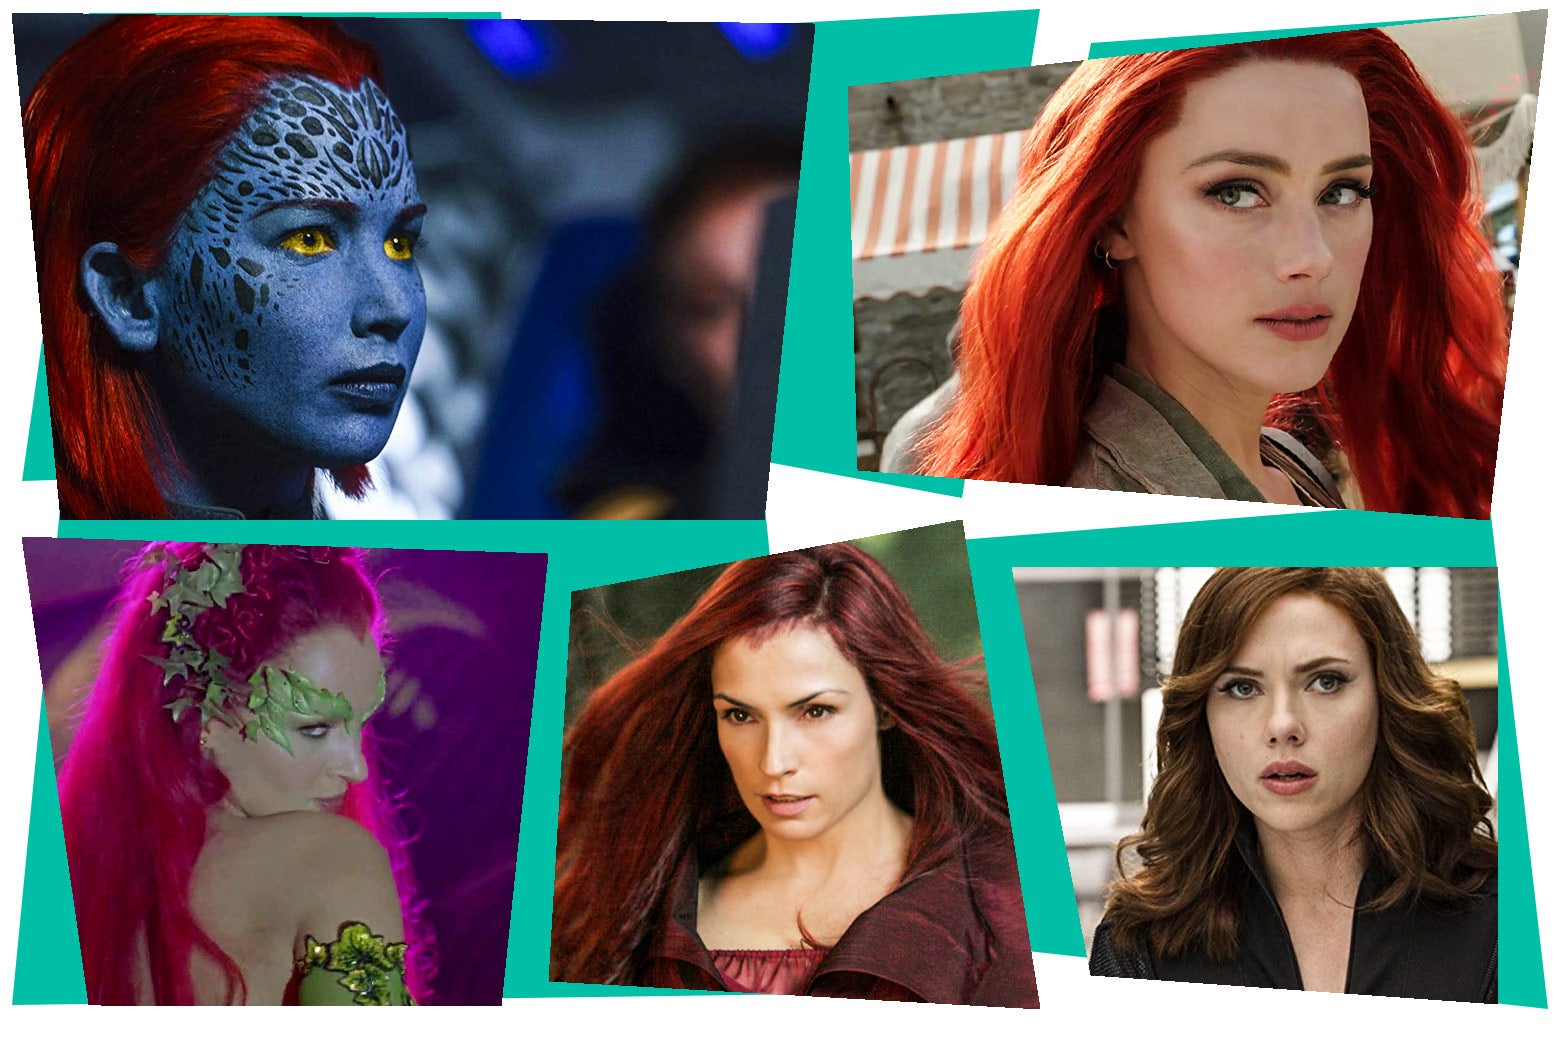 Female superheroes wearing bad red wigs: Why must comic book movies do this?